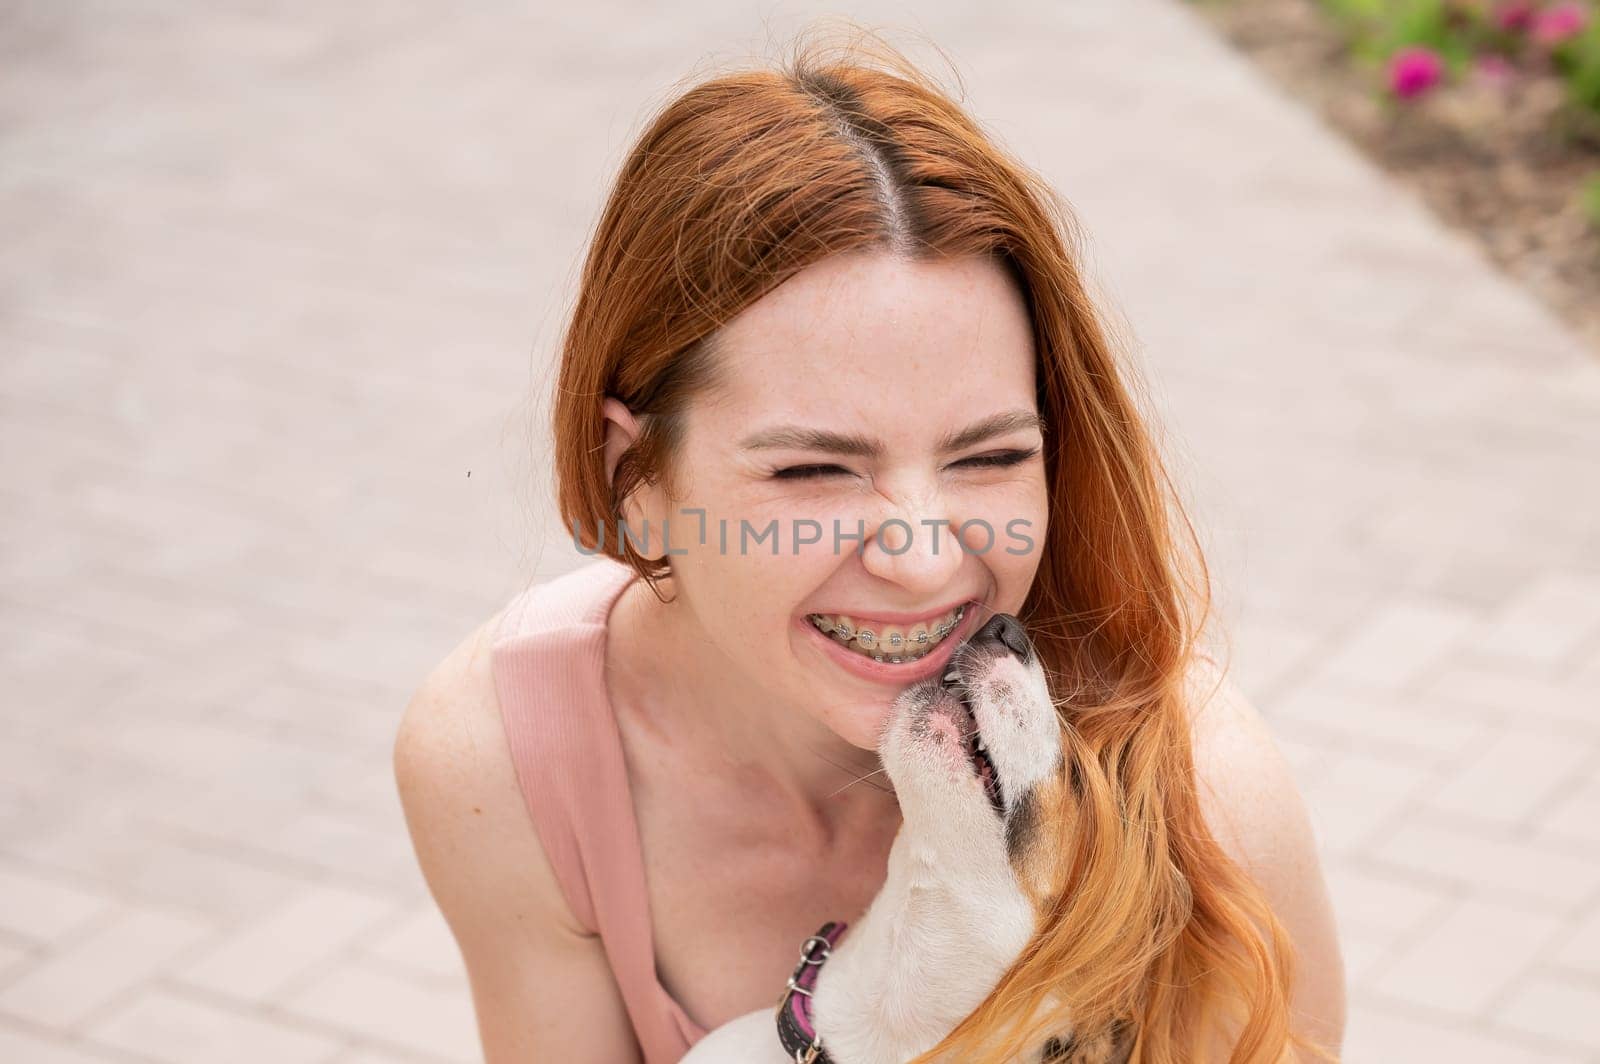 Dog jack russell terrier licks the owner in the face outdoors. Girl with braces on her teeth